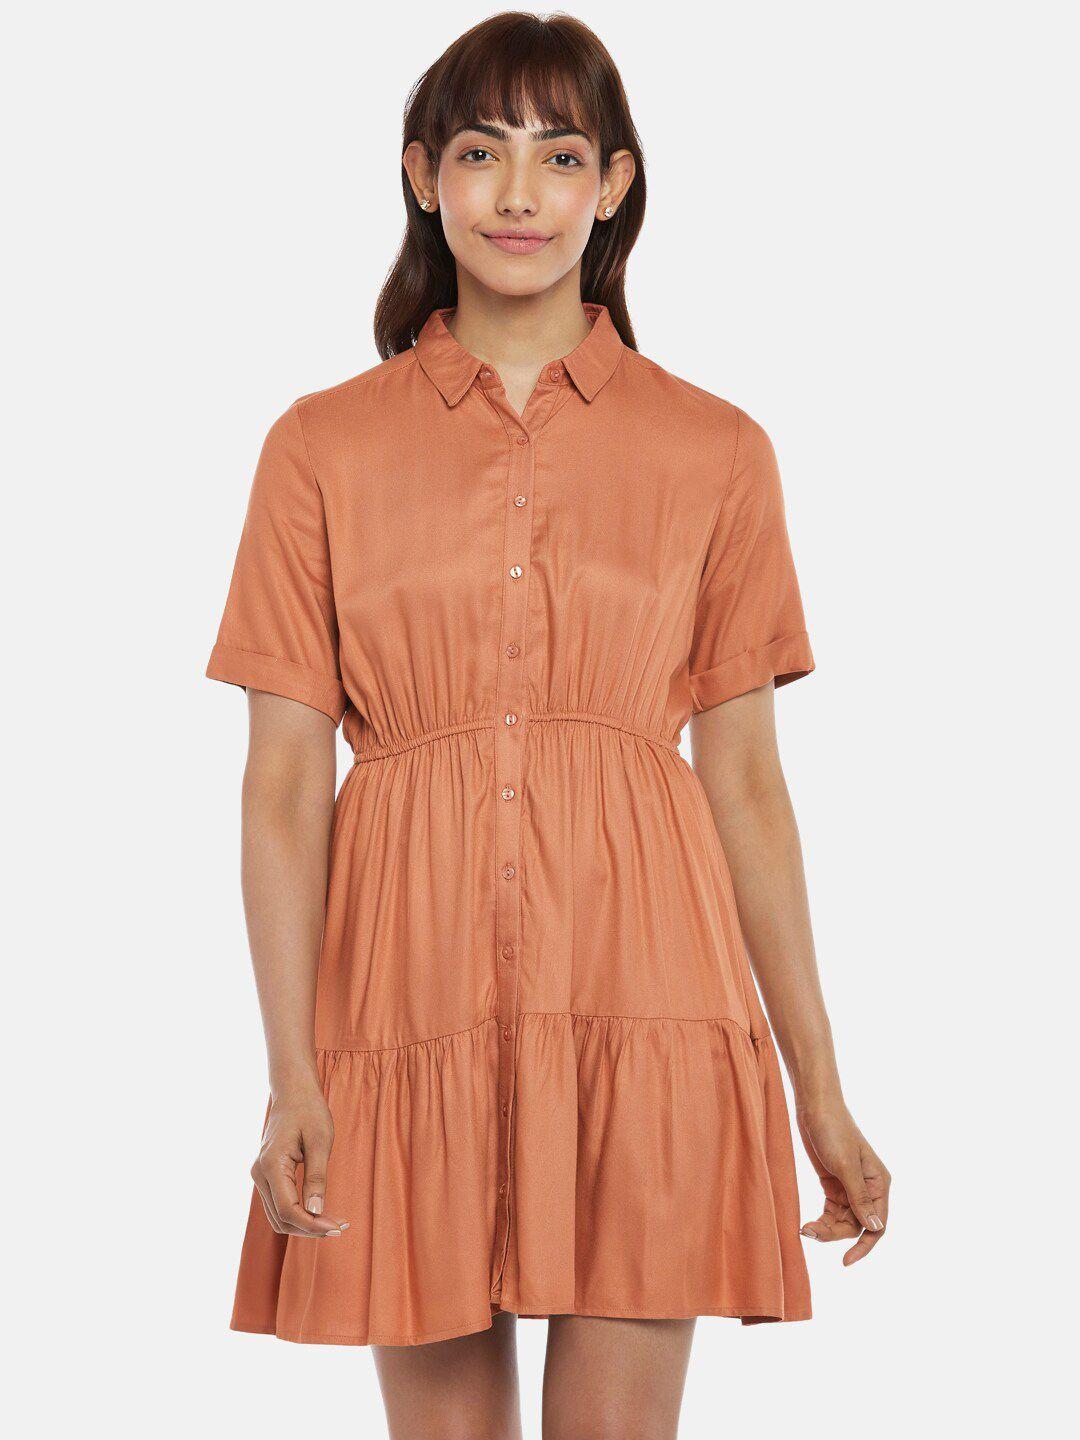 honey by pantaloons rust solid fit and flare dress